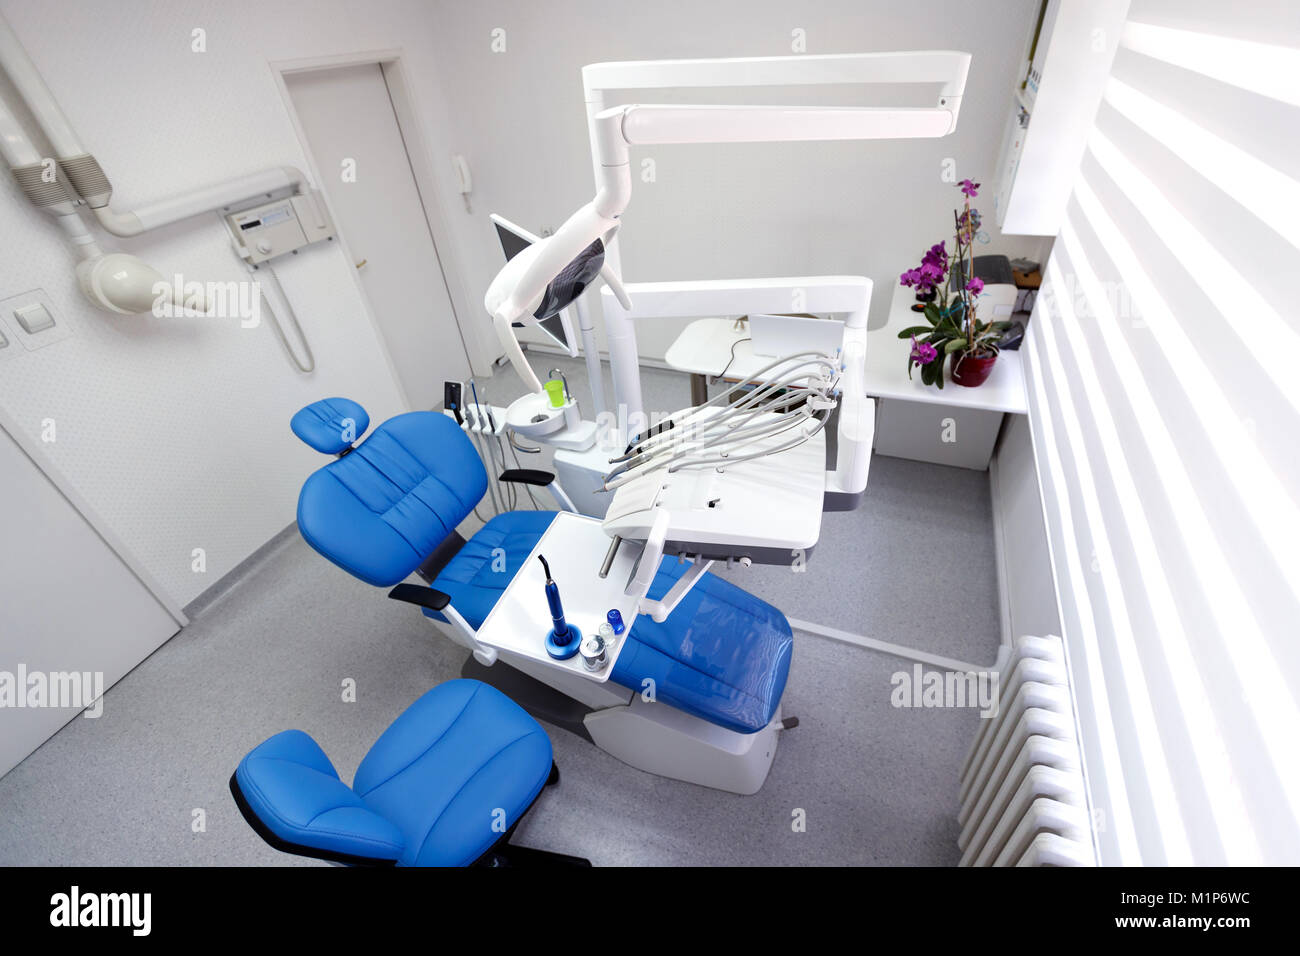 Top view of clean modern dental ordination without person Stock Photo